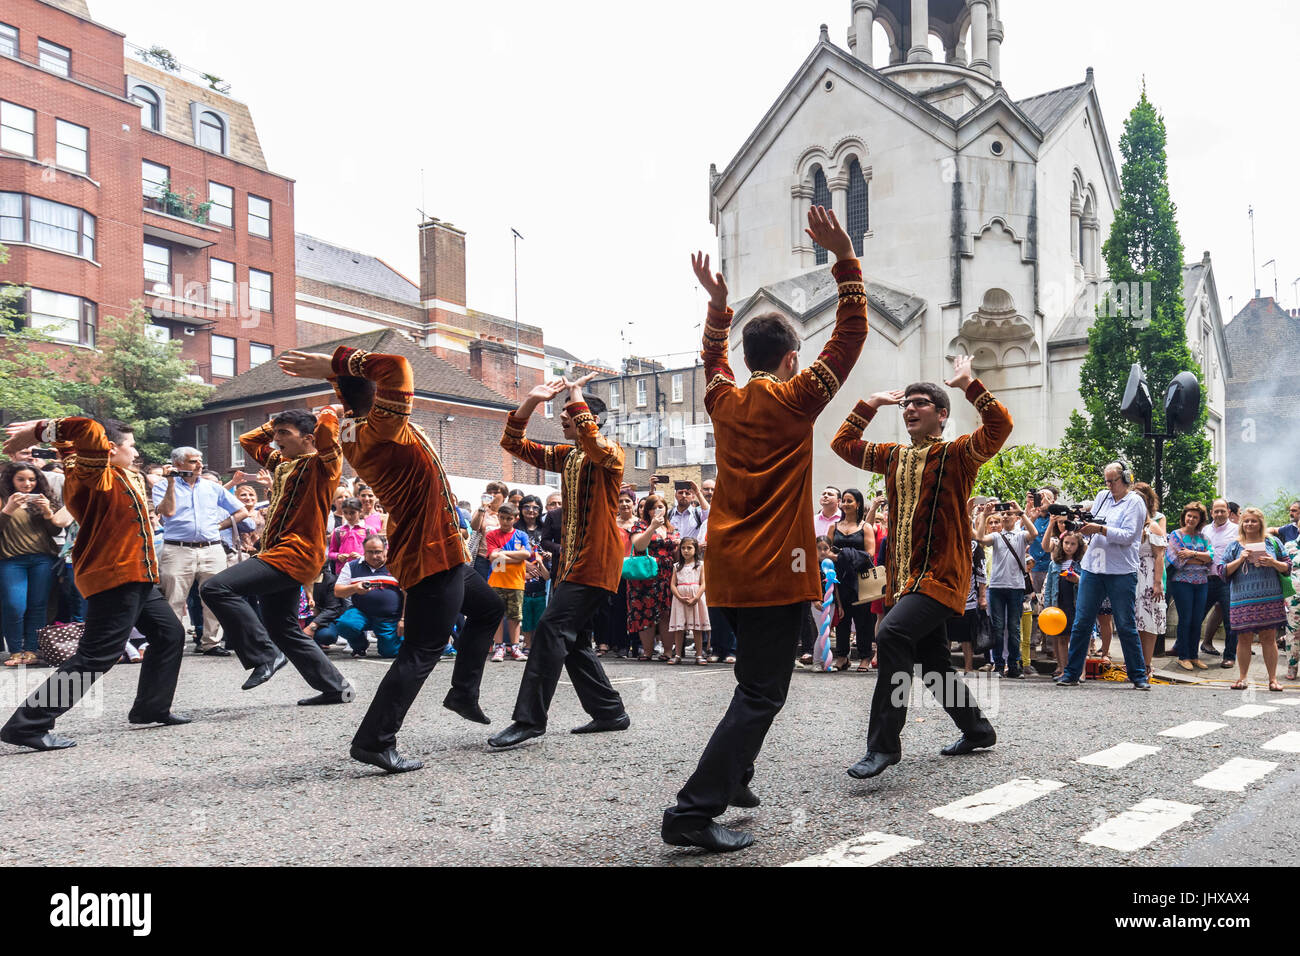 London, UK. 16th July, 2017. Dancers perform at the 7th Armenian Street Festival. © Guy Corbishley/Alamy Live News Stock Photo